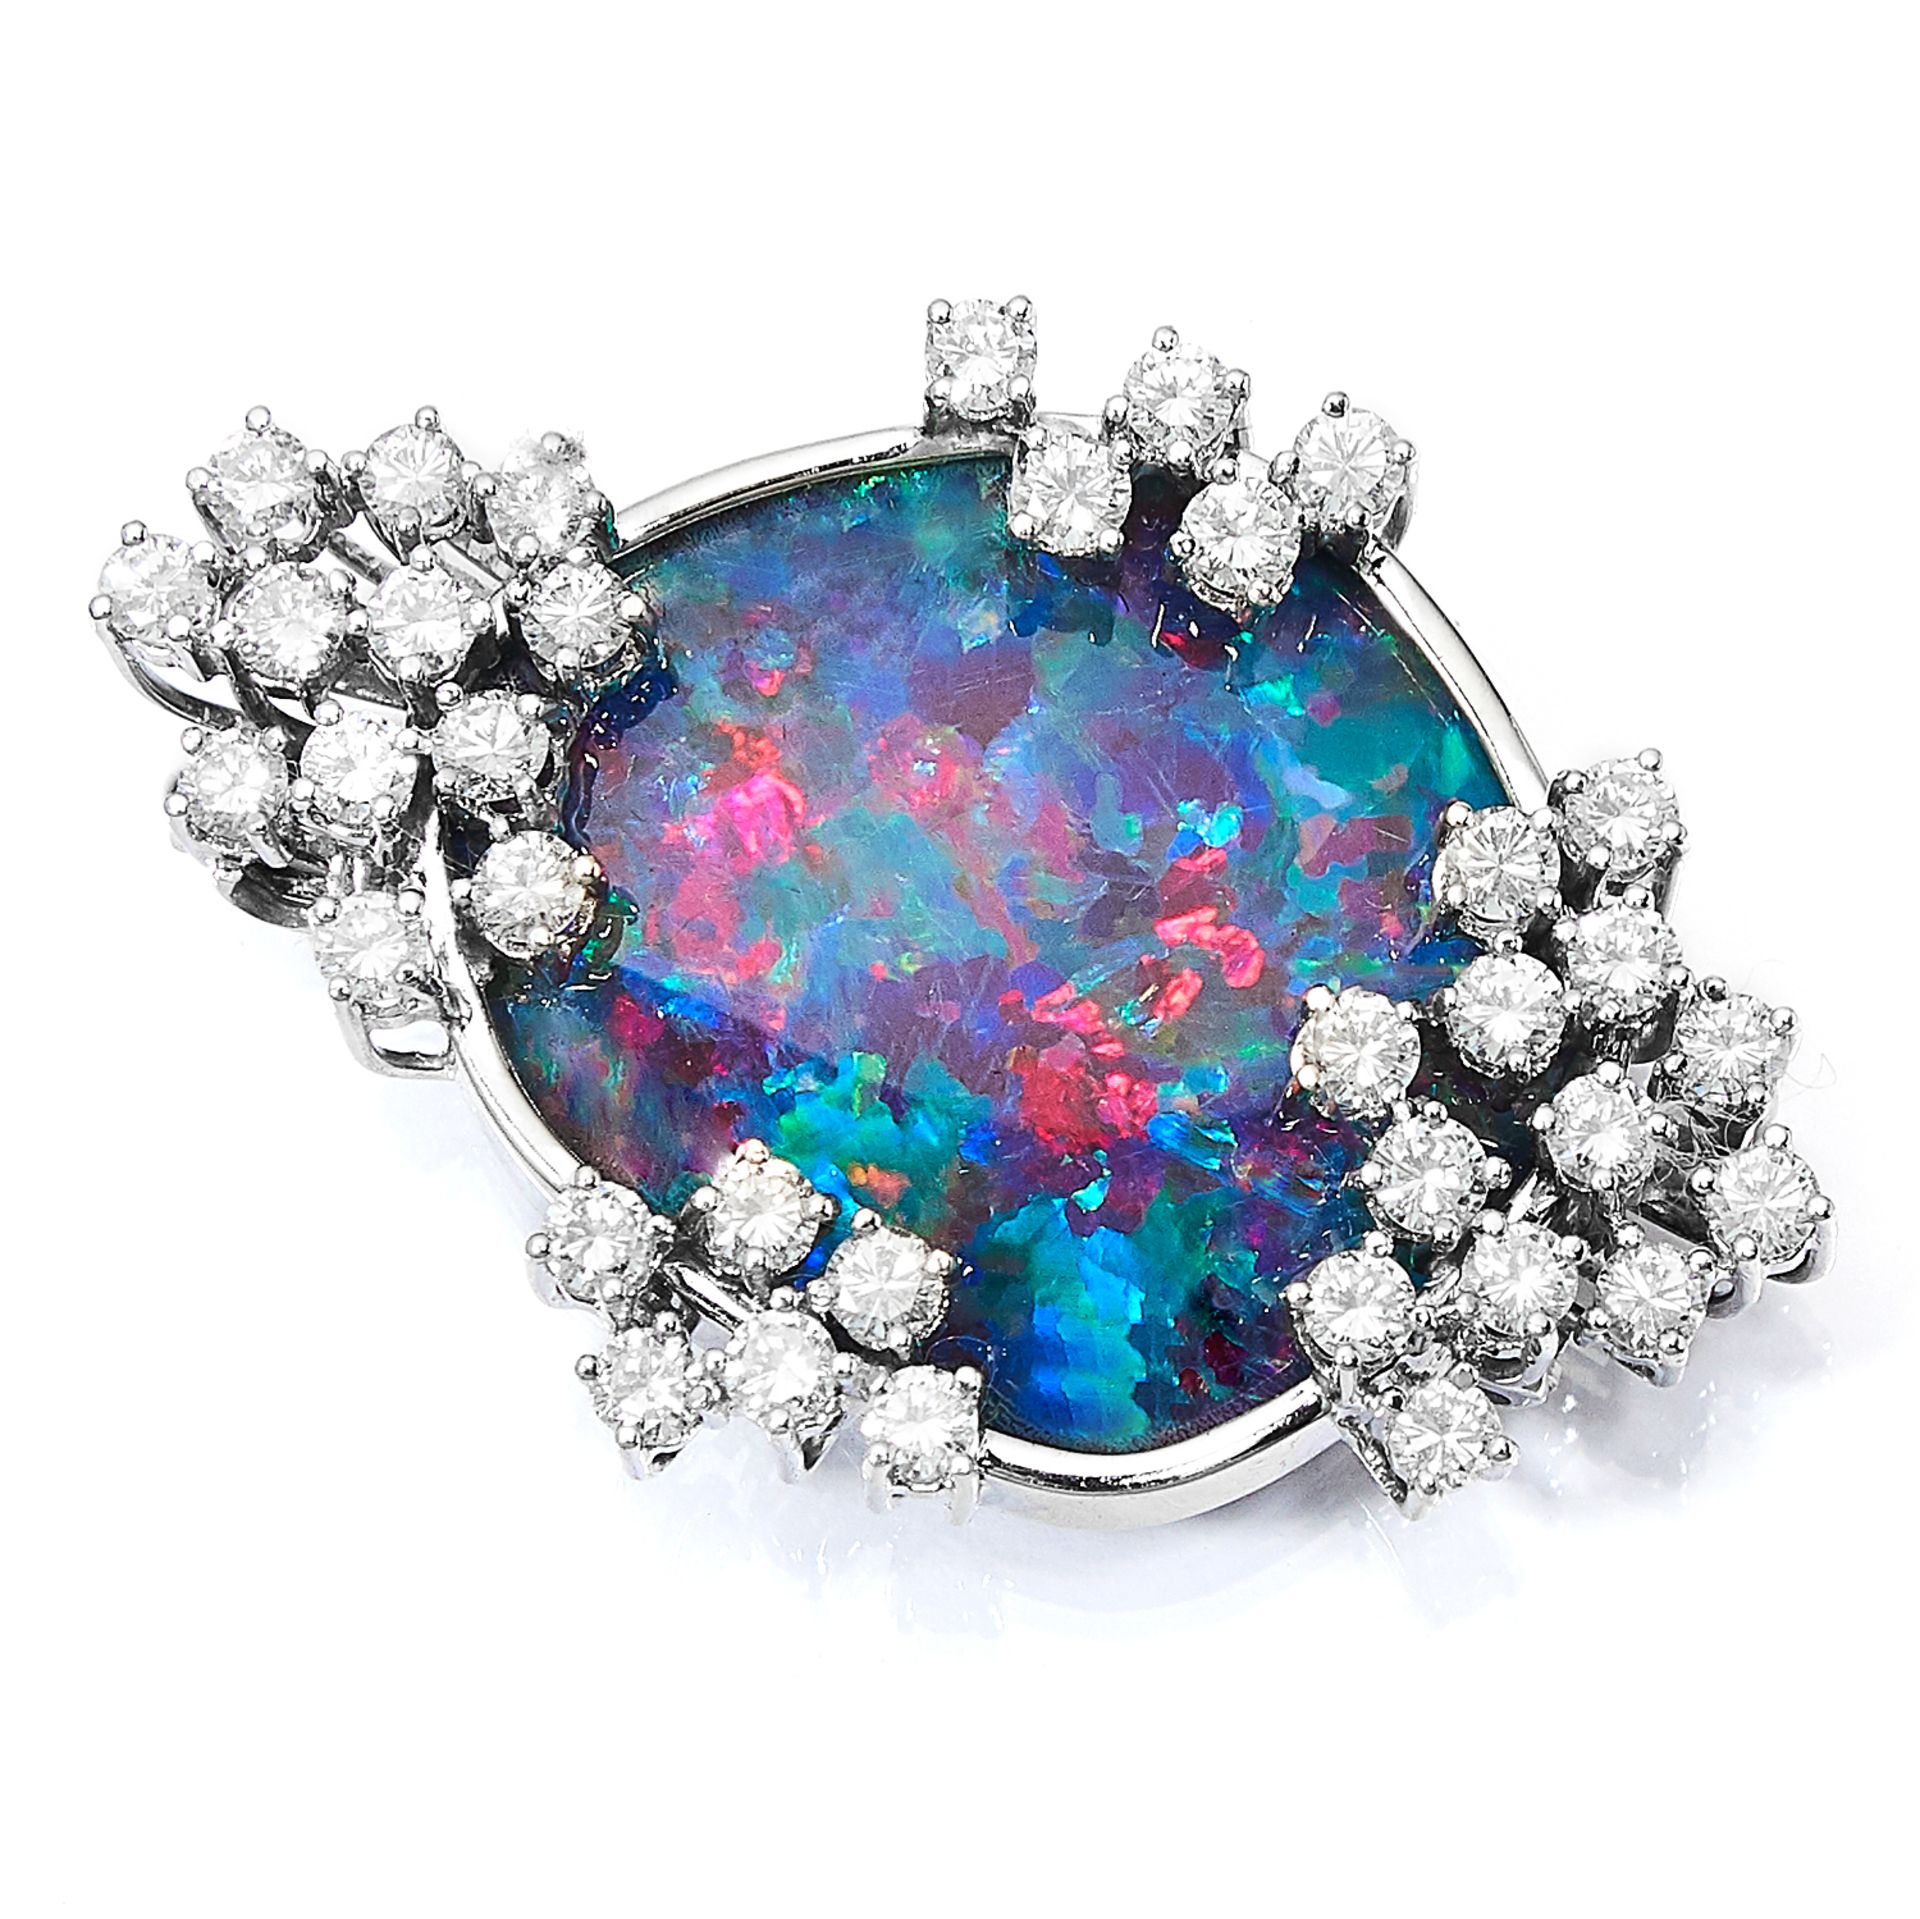 BLACK OPAL AND DIAMOND BROOCH in 14ct white gold, set with a black opal doublet in a border of round